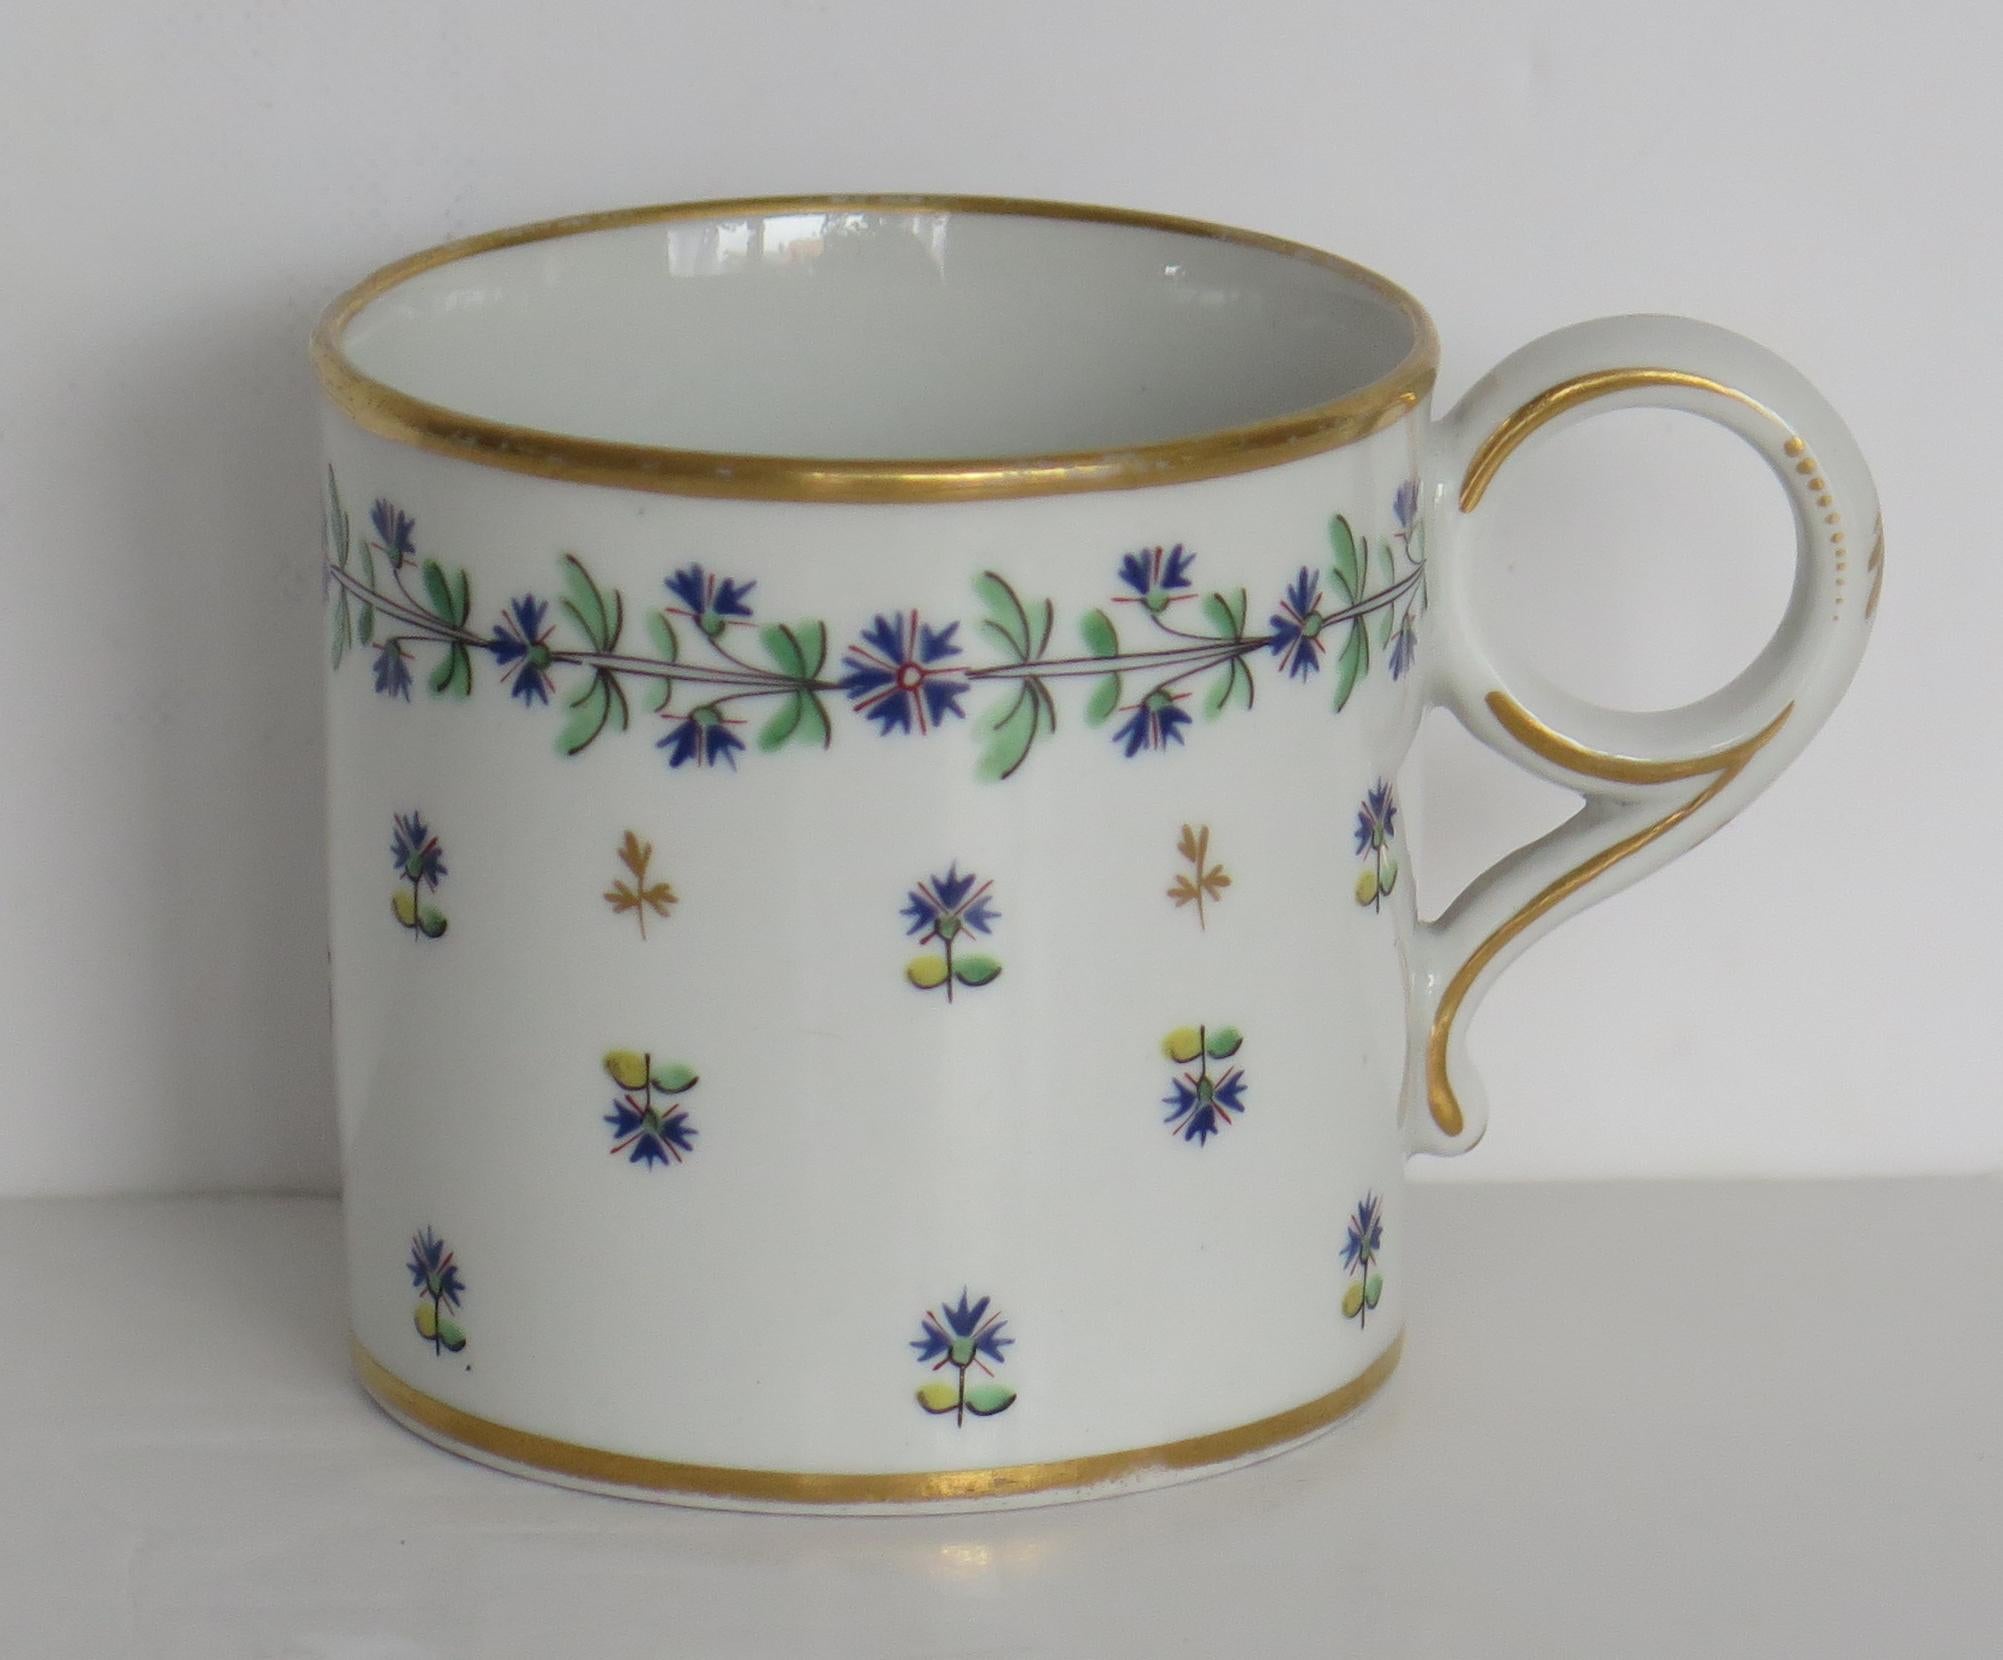 This is a high quality coffee can in a hand painted and gilded pattern made by Worcester during the Barr period (B) of George 111rd years, circa 1807-1813.

The coffee can is well potted and nominally parallel, with a ring handle. It has a shallow